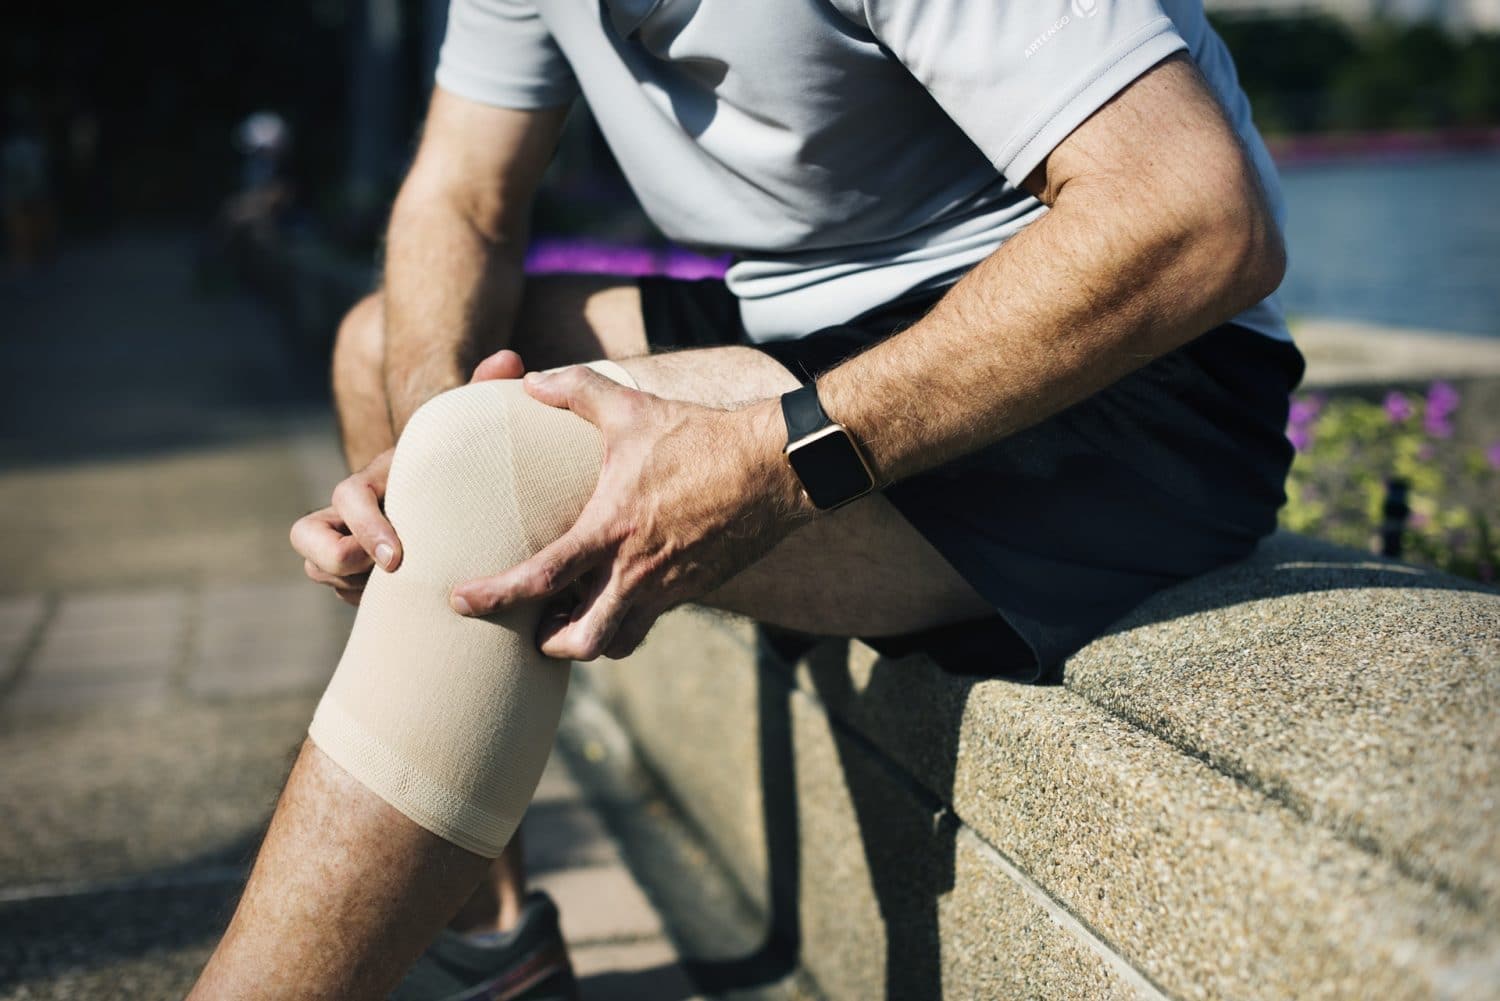 Injuries Taking a Long Time to Heal? Where You Were Hurt Matters.